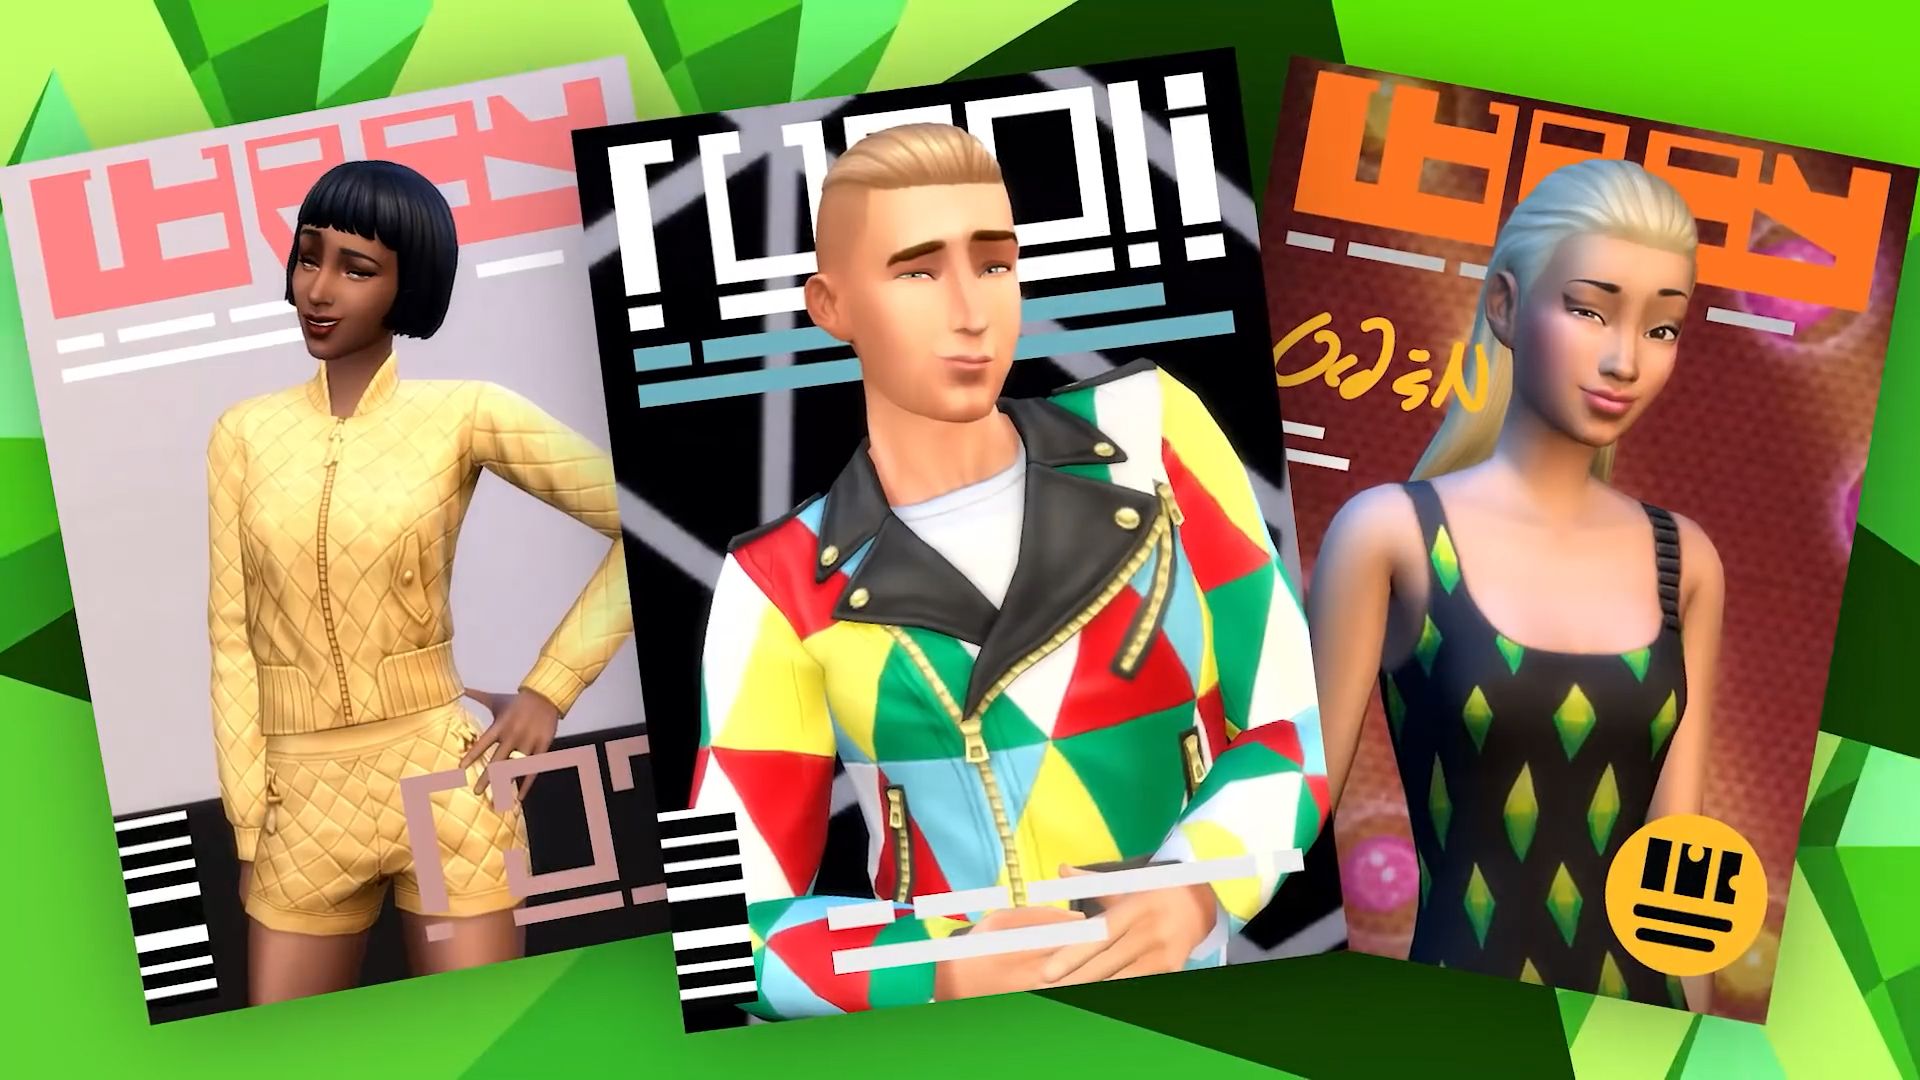 The Sims 4 Moschino Stuff Pack Announced for PC, Mac and Consoles